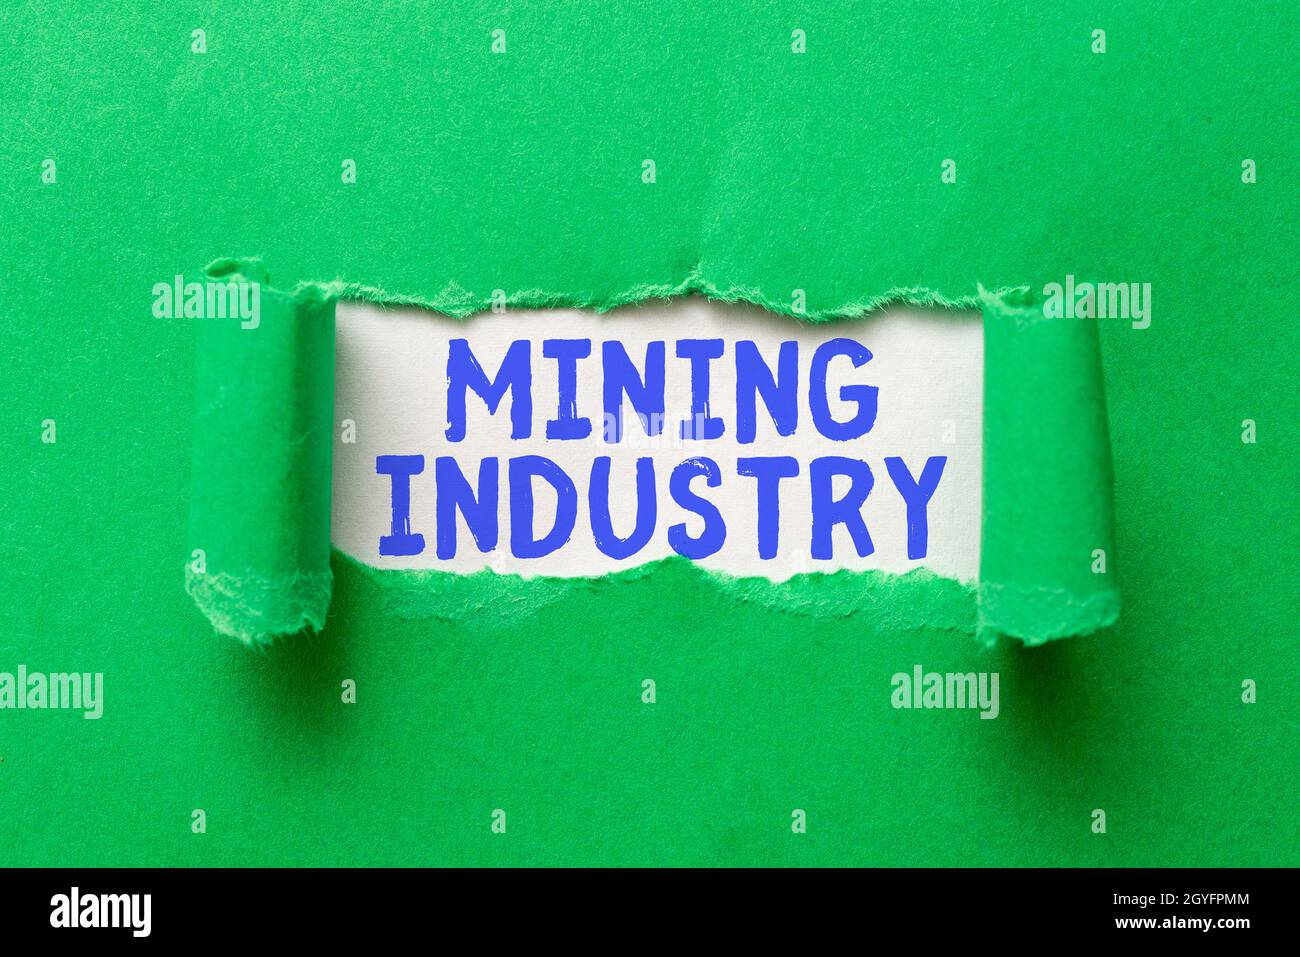 Text showing inspiration Mining Industry, Internet Concept extraction of precious minerals and geological materials Discovering New Opportunity Fresh Stock Photo